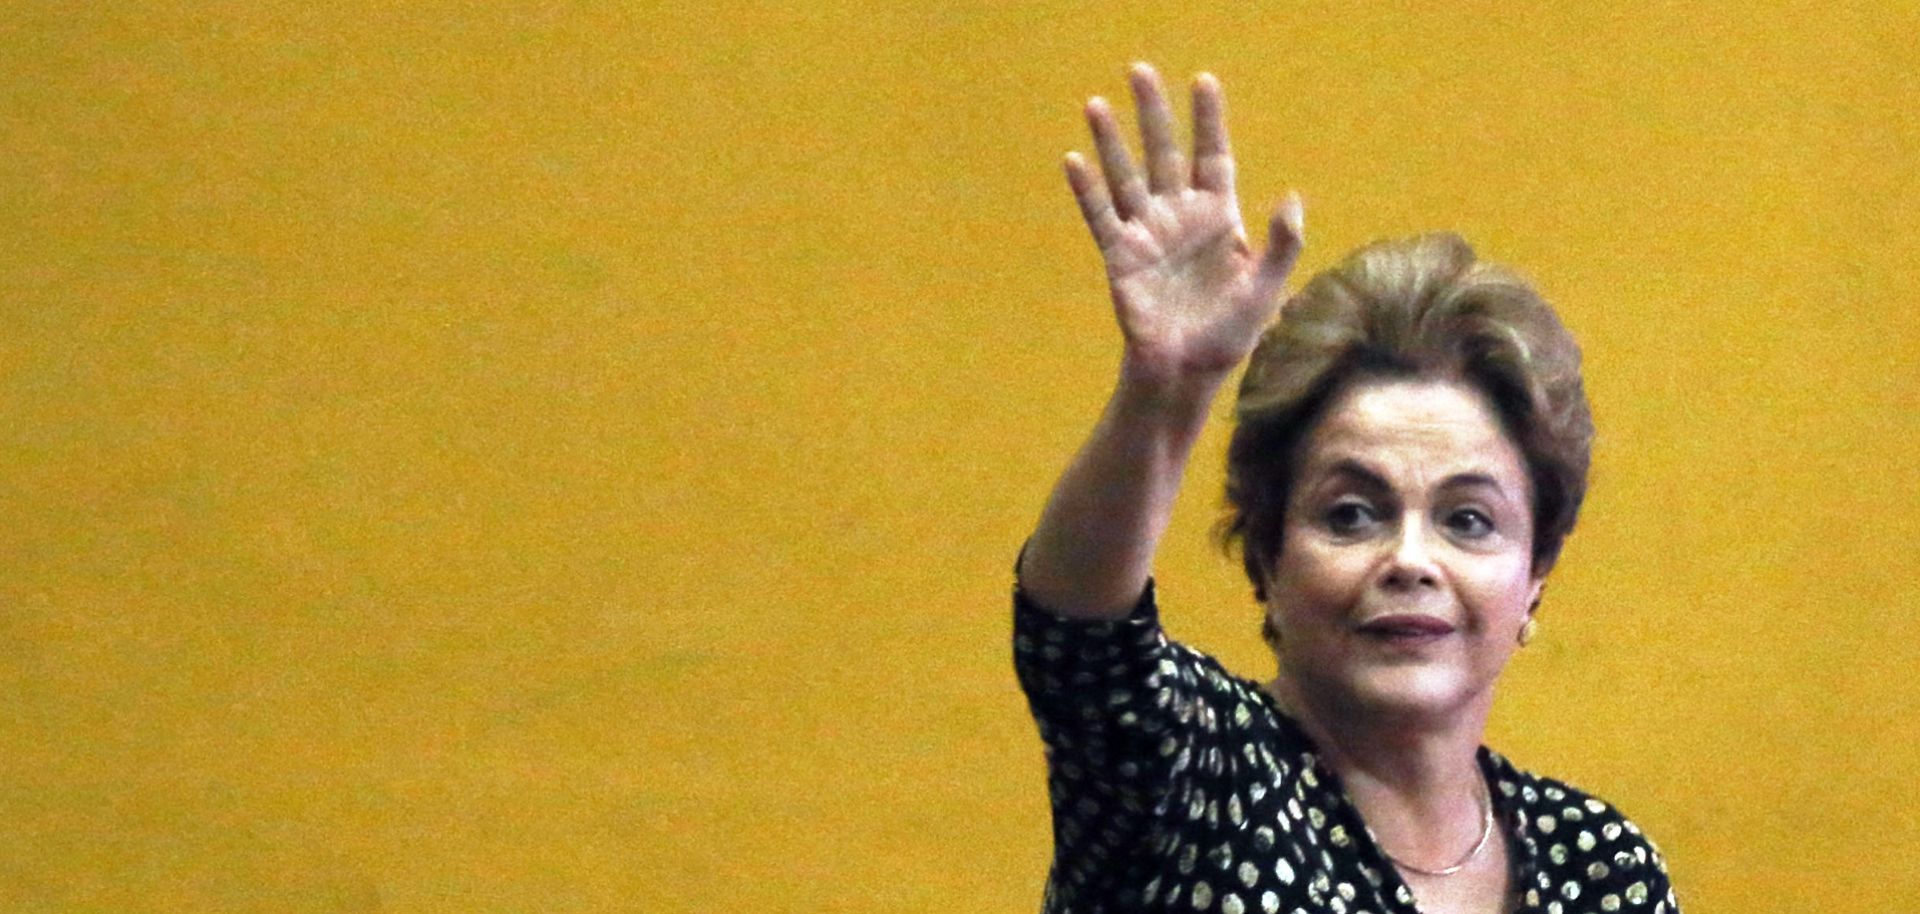 Brazil's embattled president, Dilma Rousseff, waves as she enters a conference in Brasilia on May 10. 